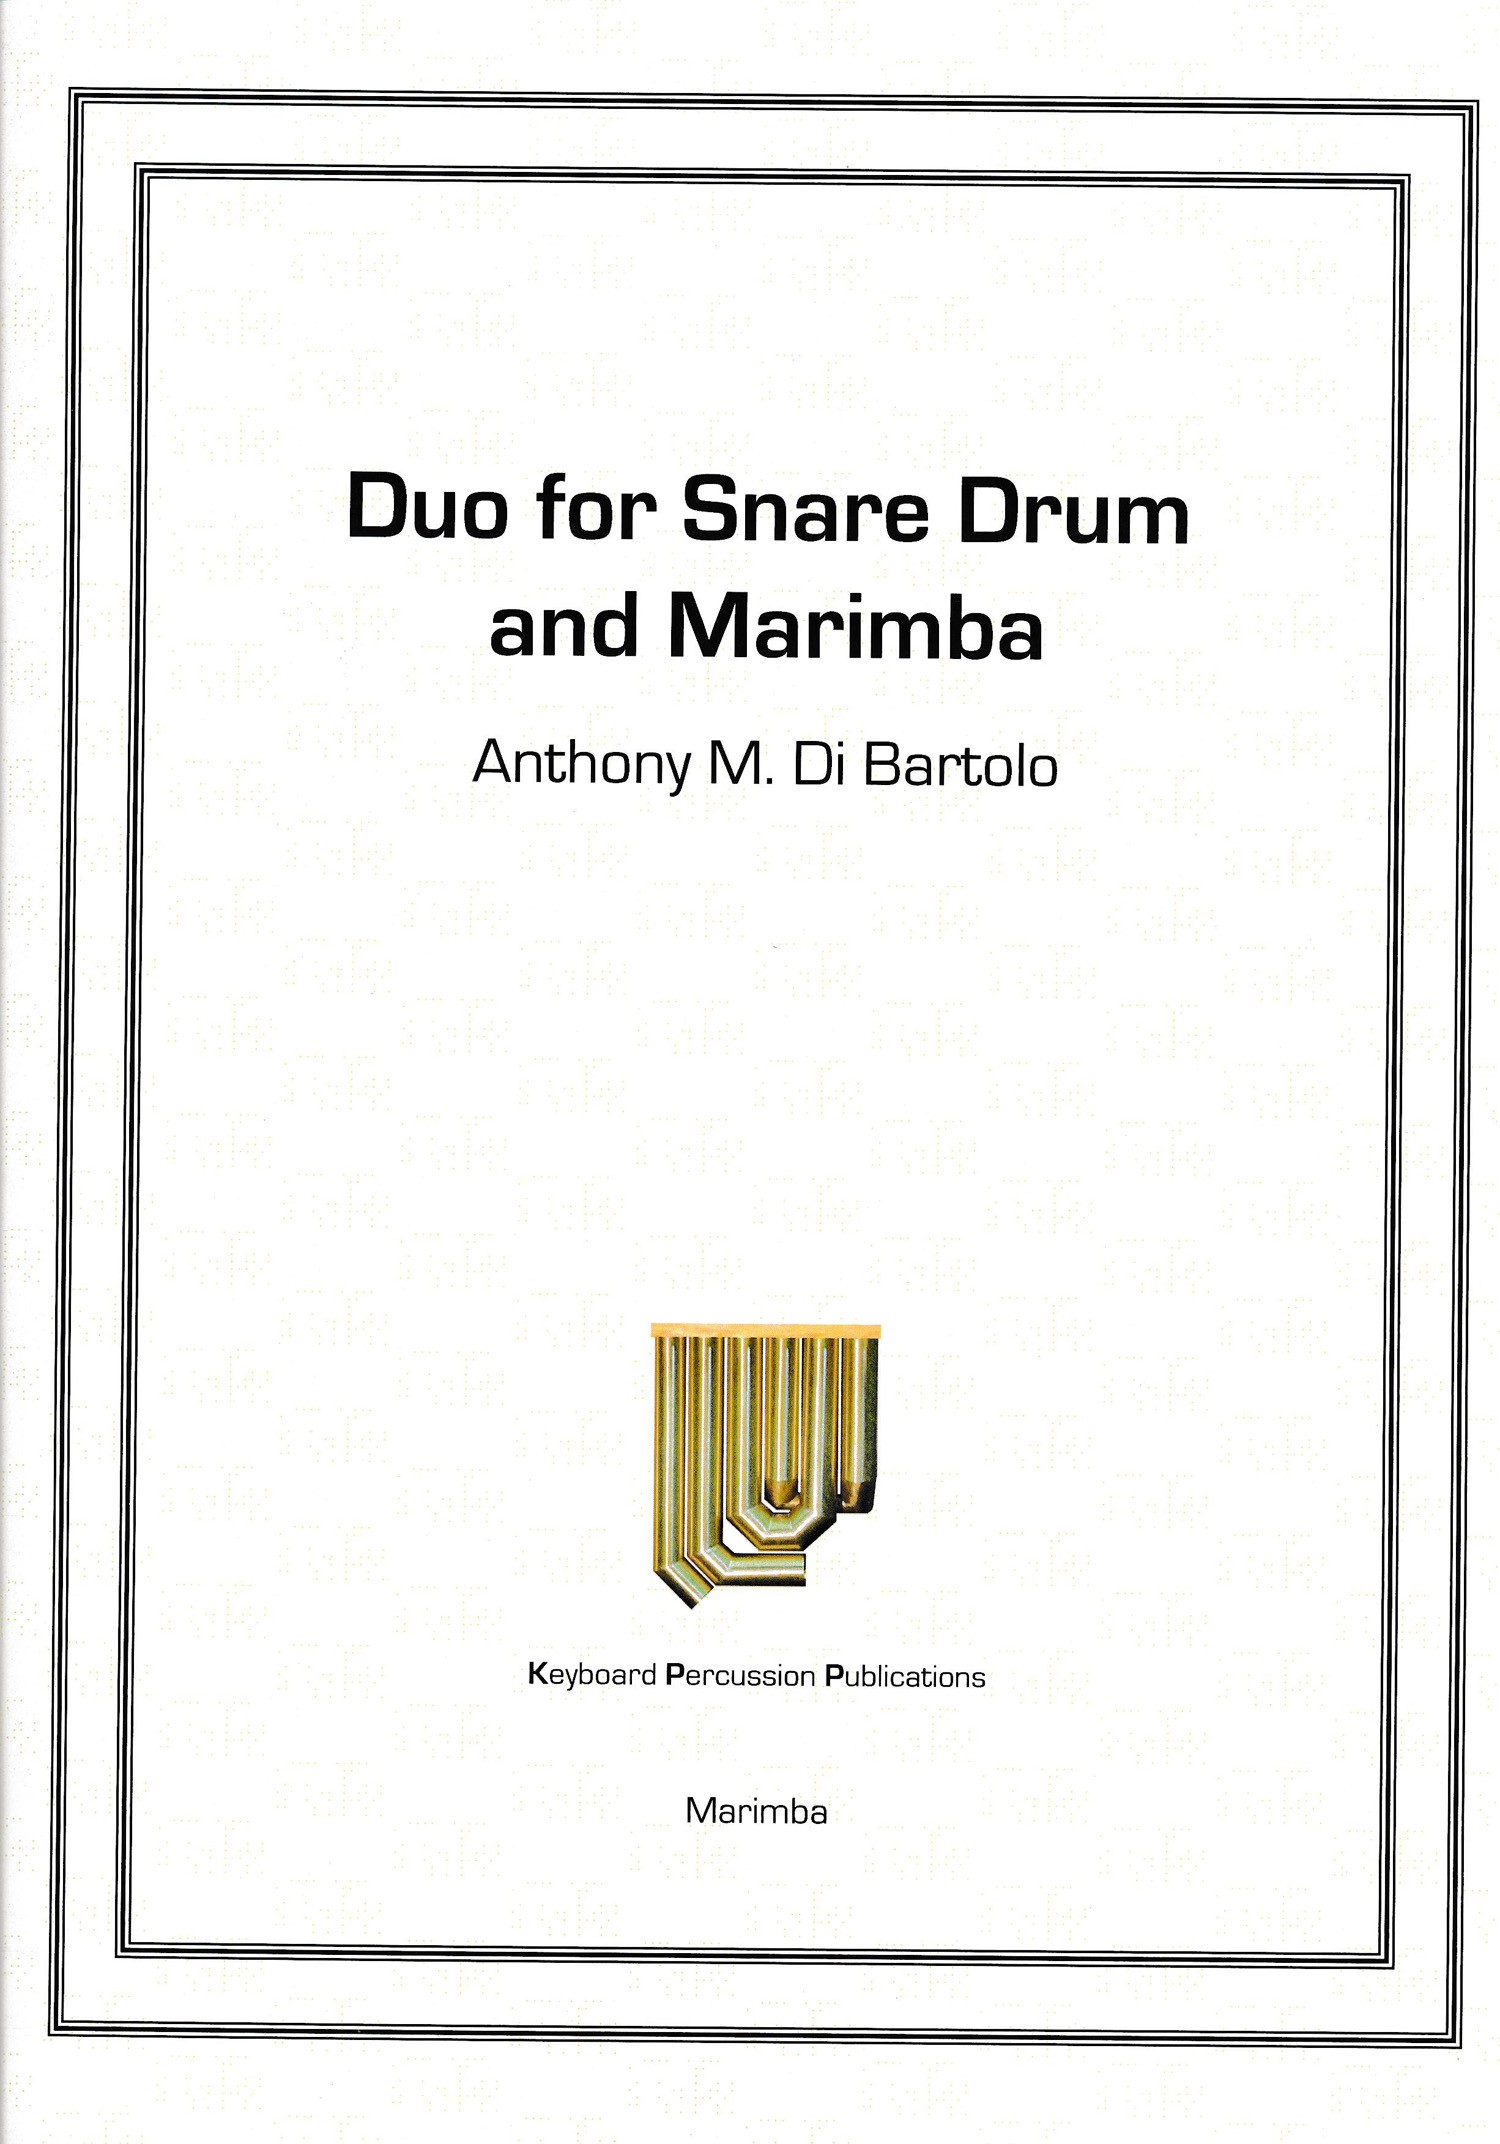 Duo for Snare Drum and Marimba